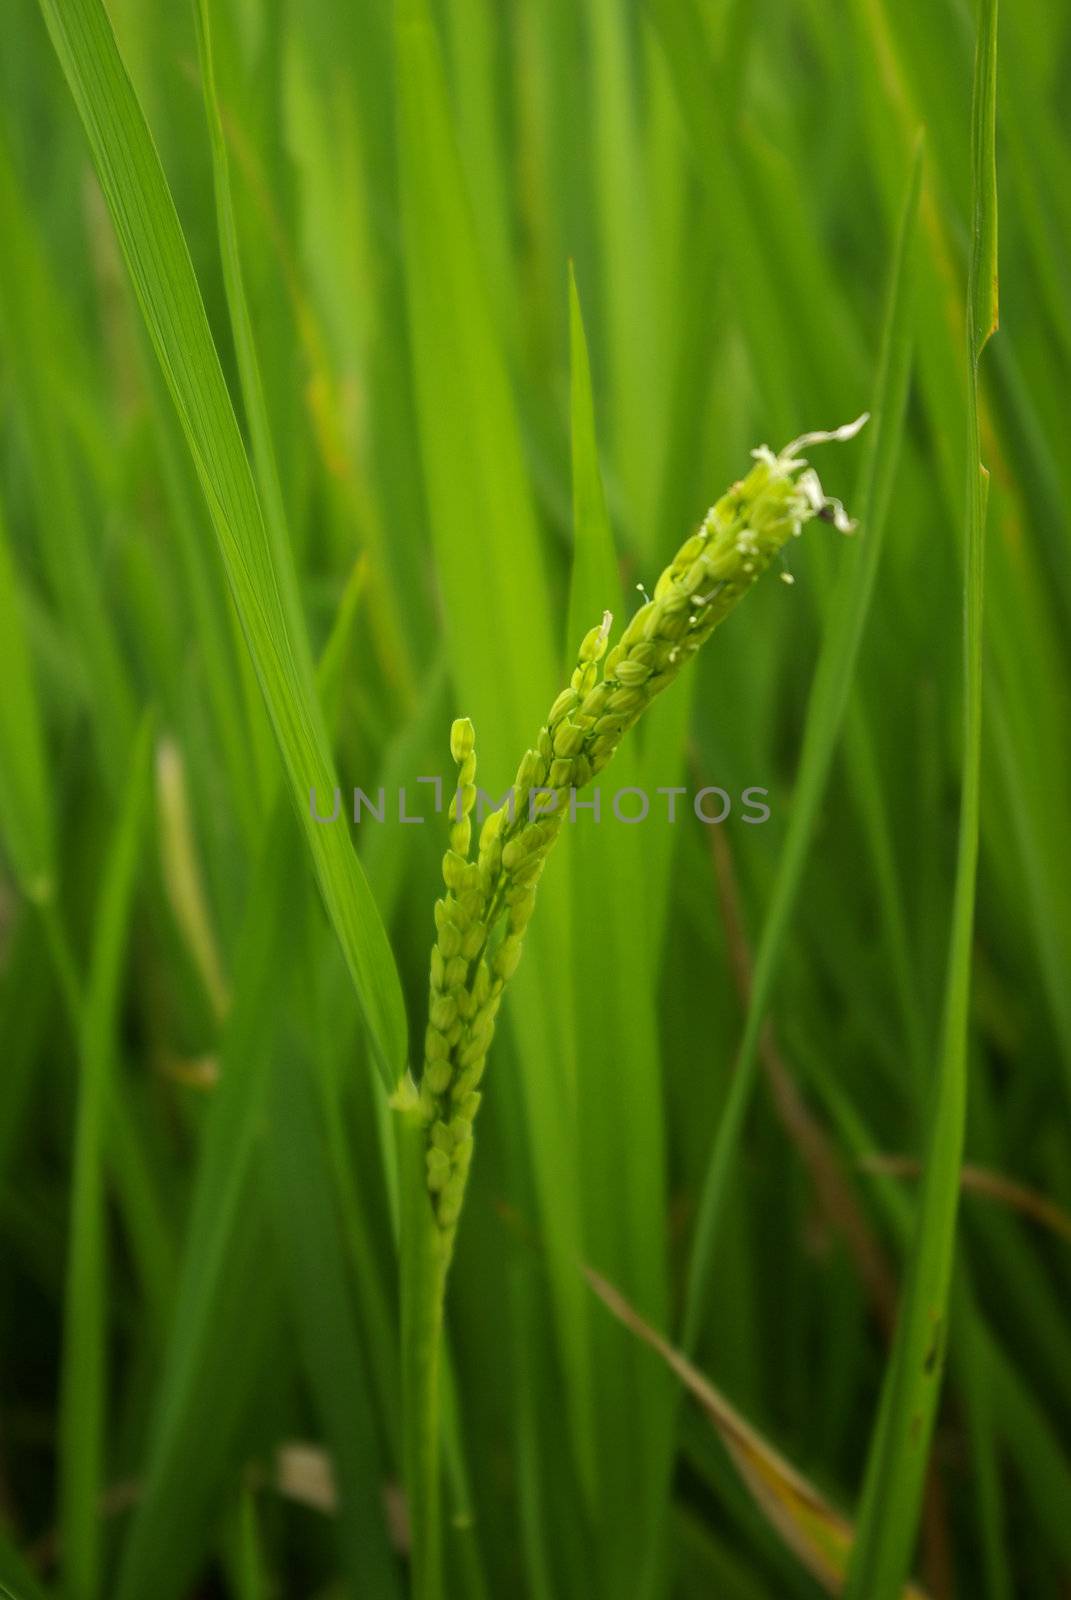 It's a simple close up on a rice blade in a ricefield on Bali island.